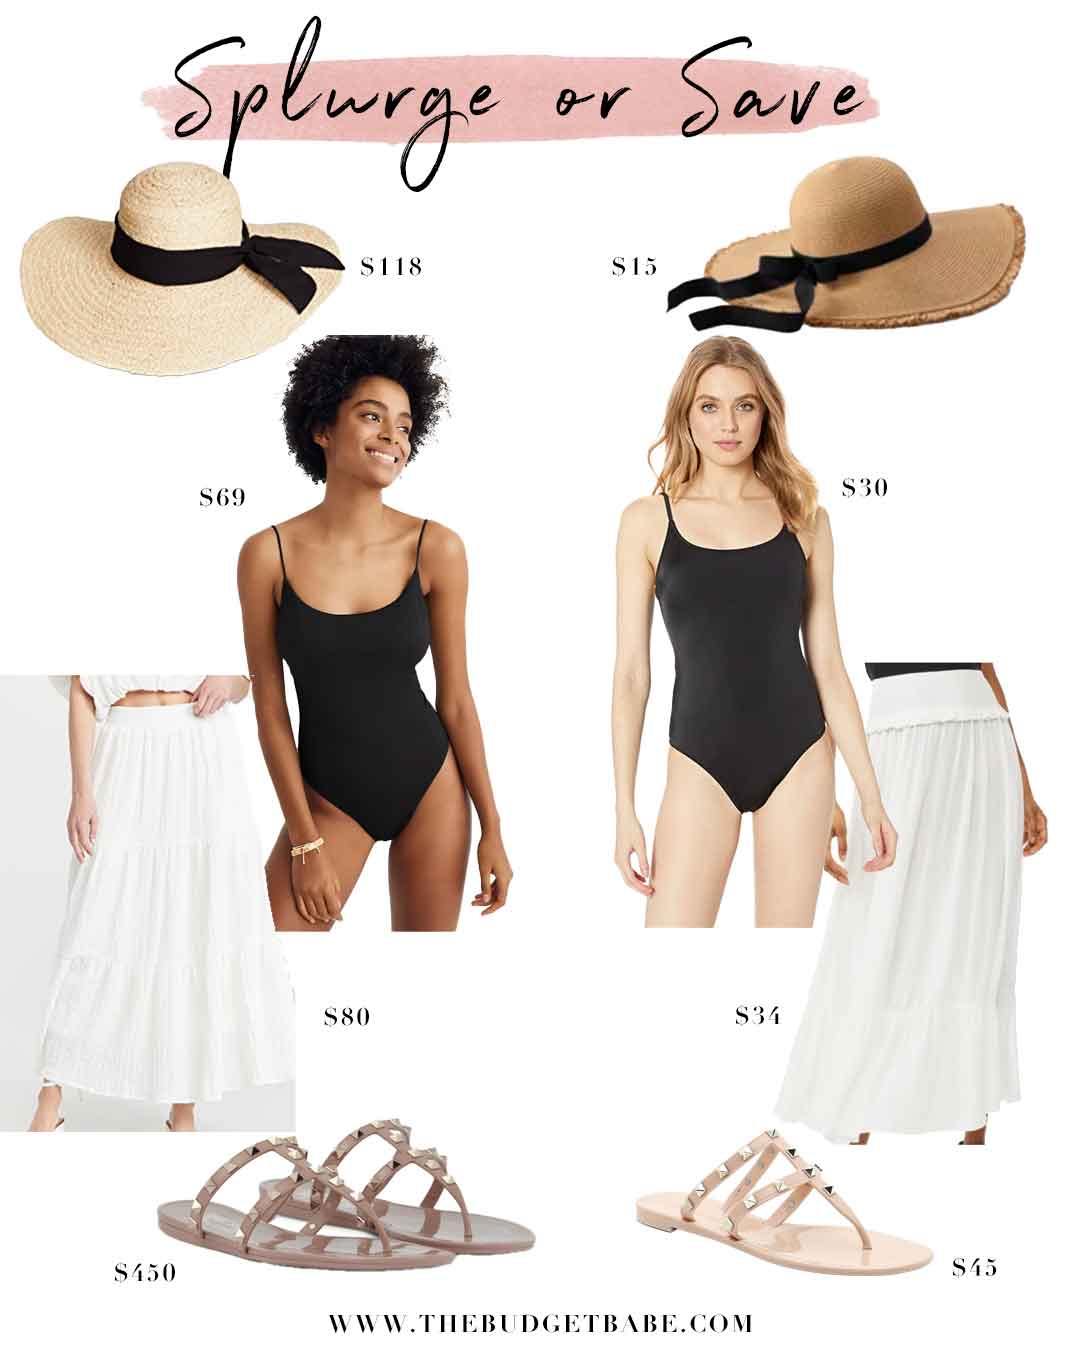 Splurge or Save on this beach outfit!